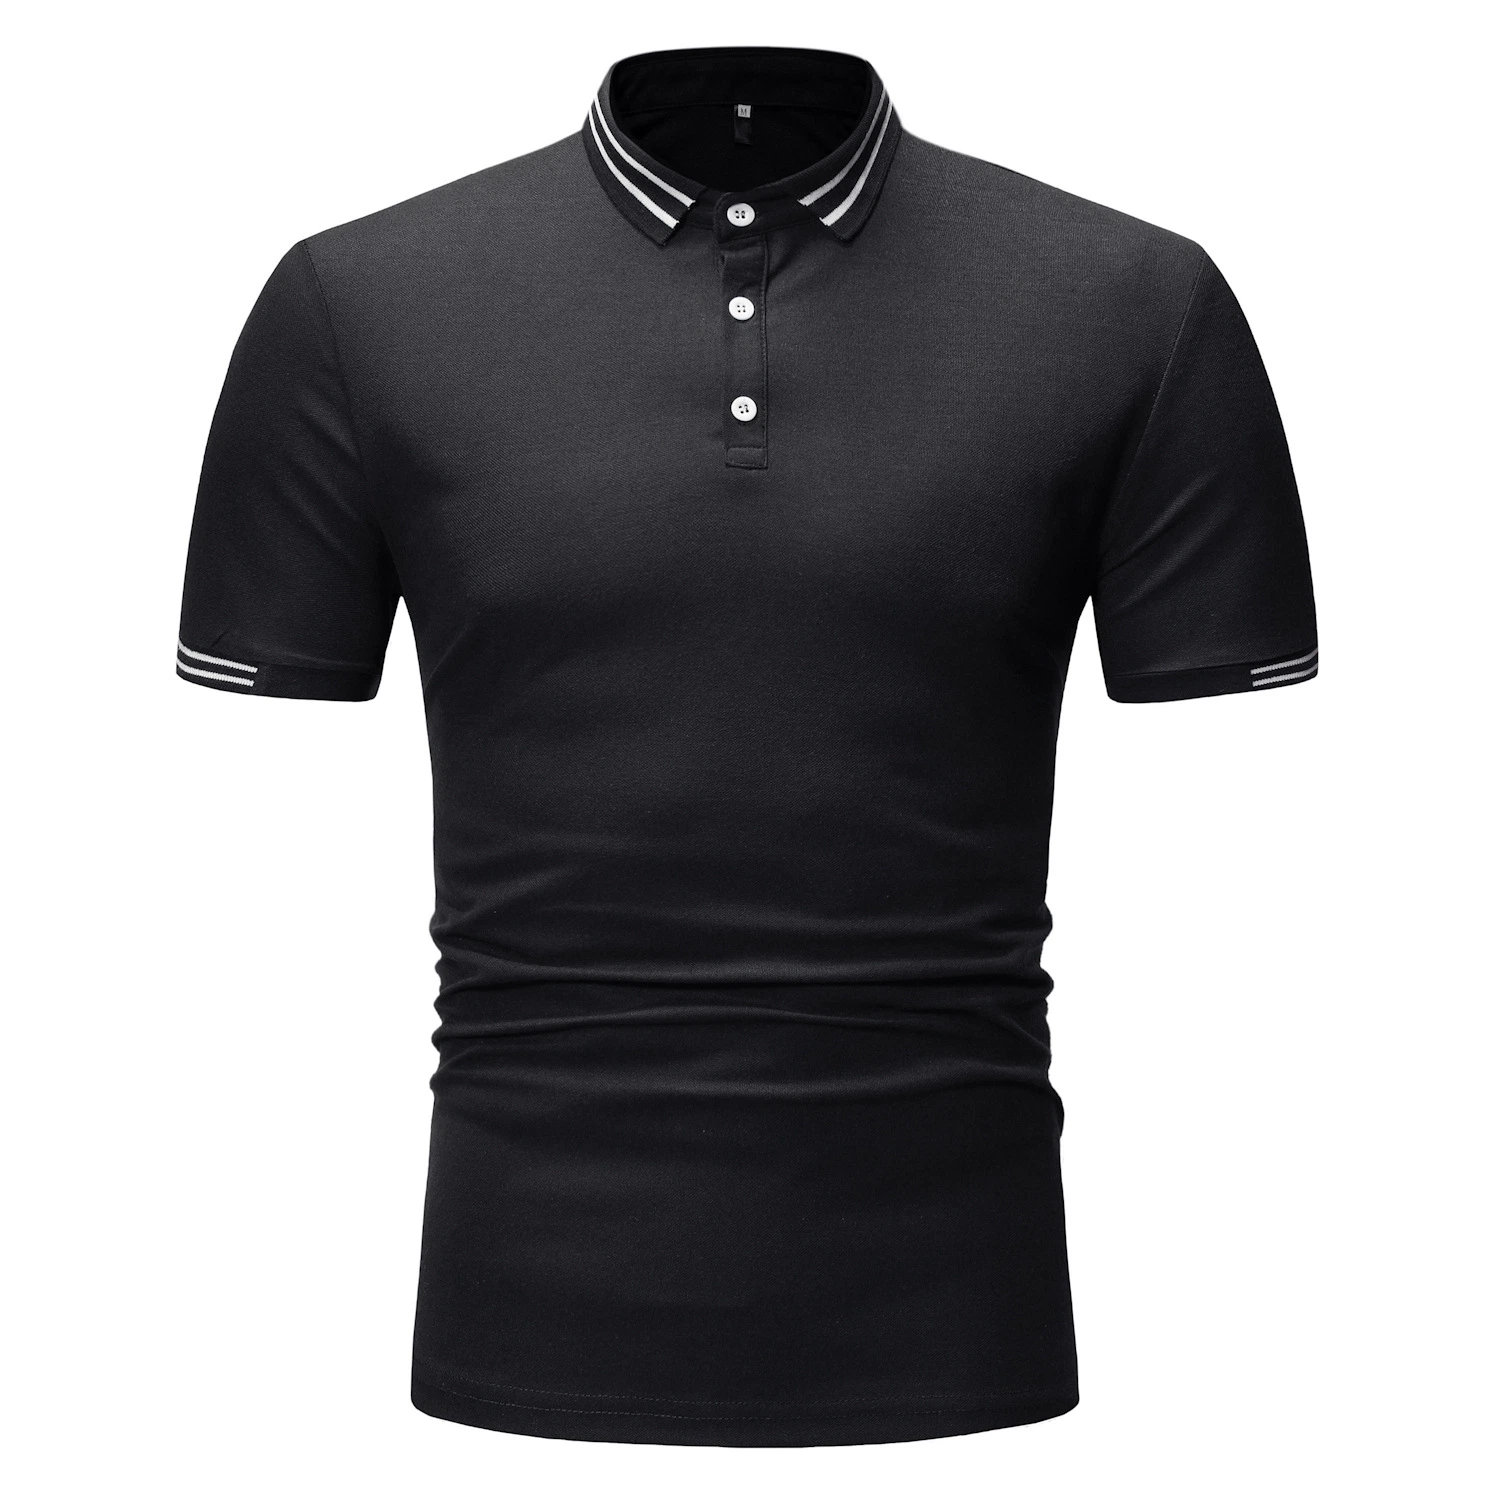 Fashion Wholesale Men's Summer New Splicing Short Sleeve Casual Golf T Shirts Bussiness Wear for Men Polo Shirts